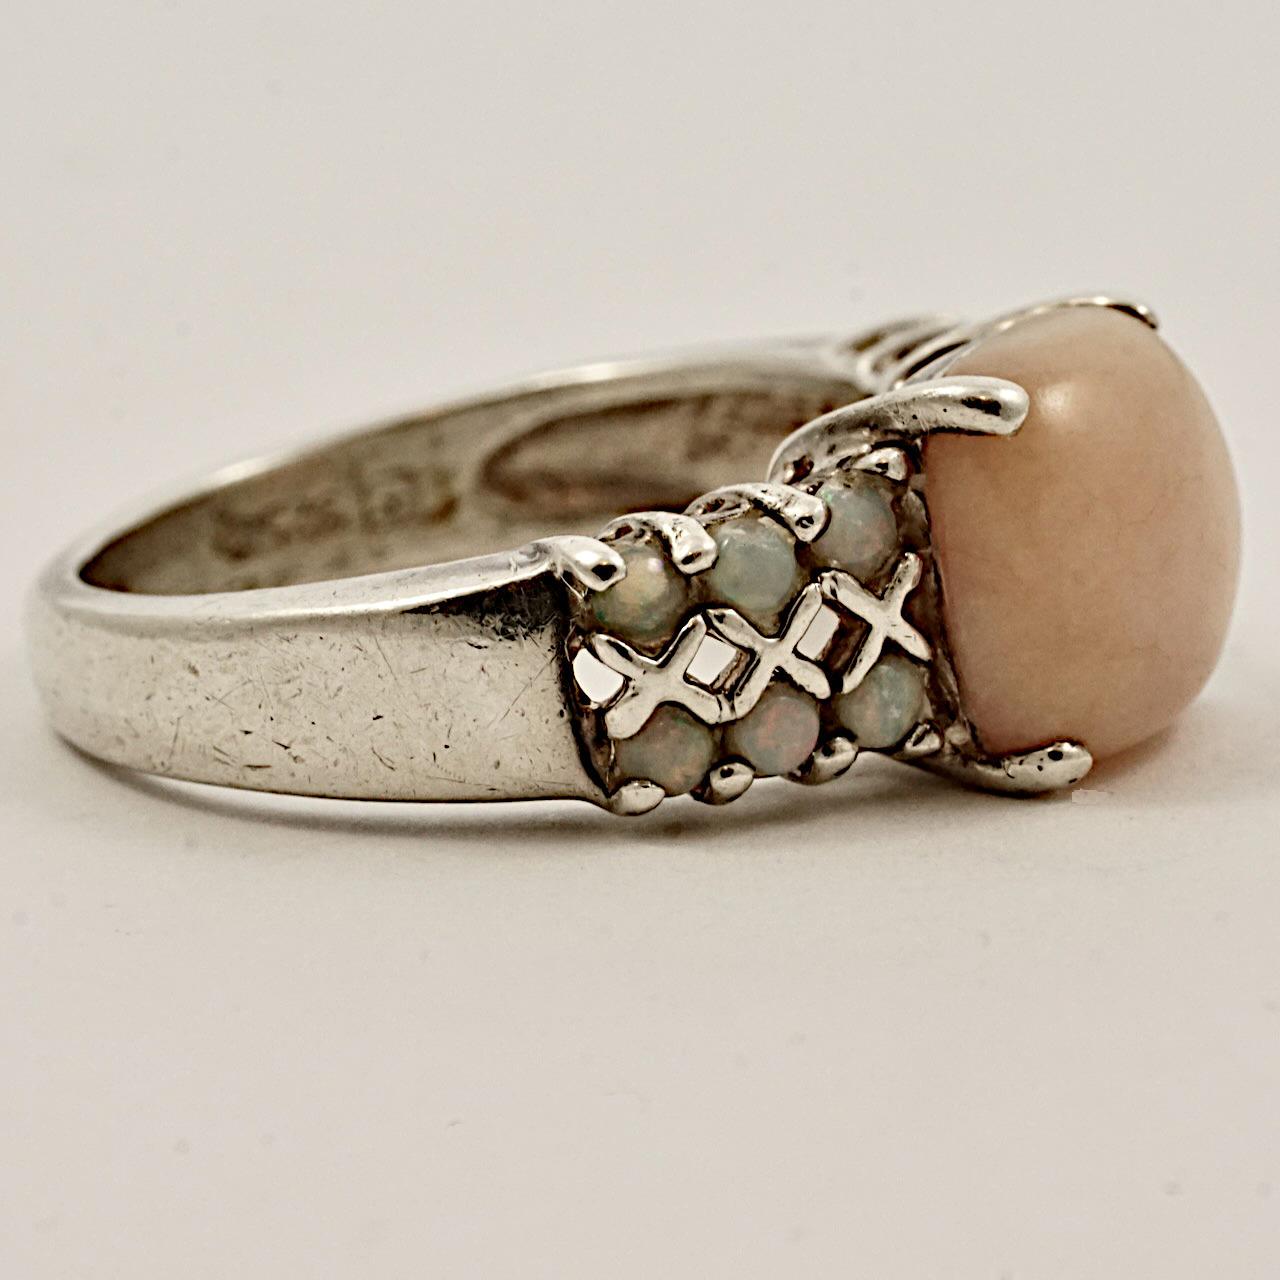 Mixed Cut Sterling Silver Pink Opal and White Opal Dress Ring circa 1990s